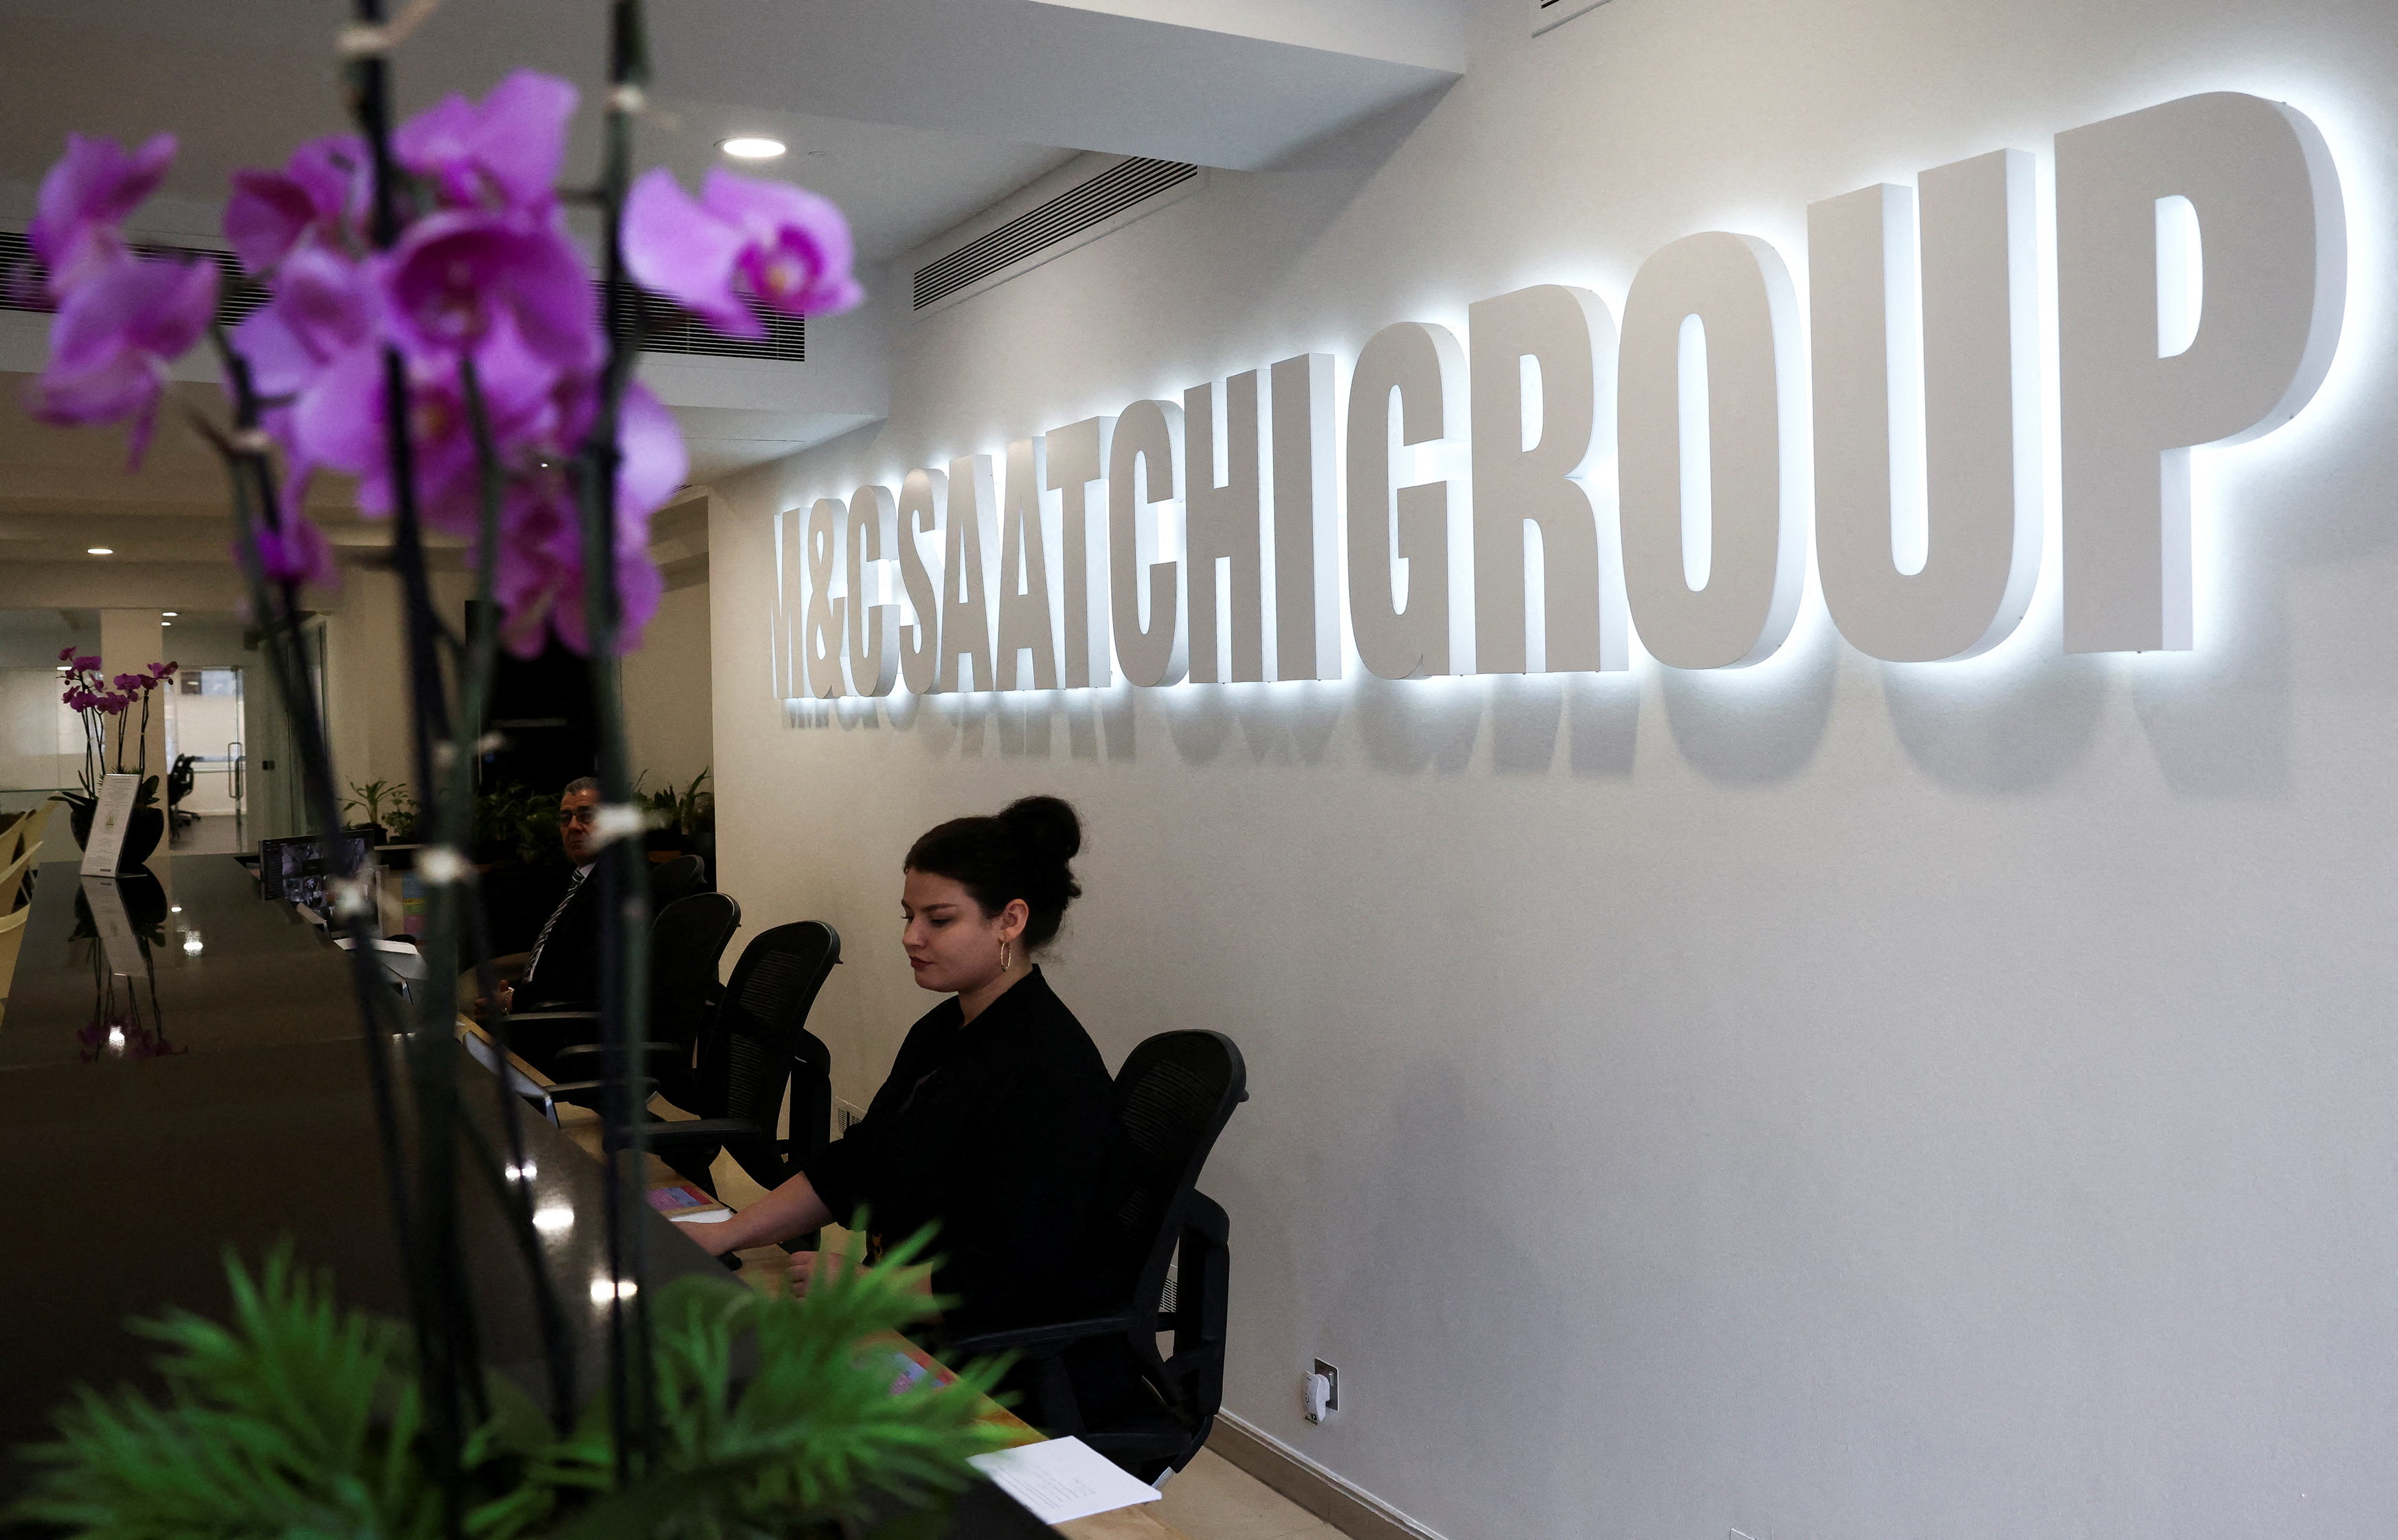 Signage is seen at the reception of the M&C Saatchi office in central London, Britain, January 6, 2022. REUTERS/Henry Nicholls